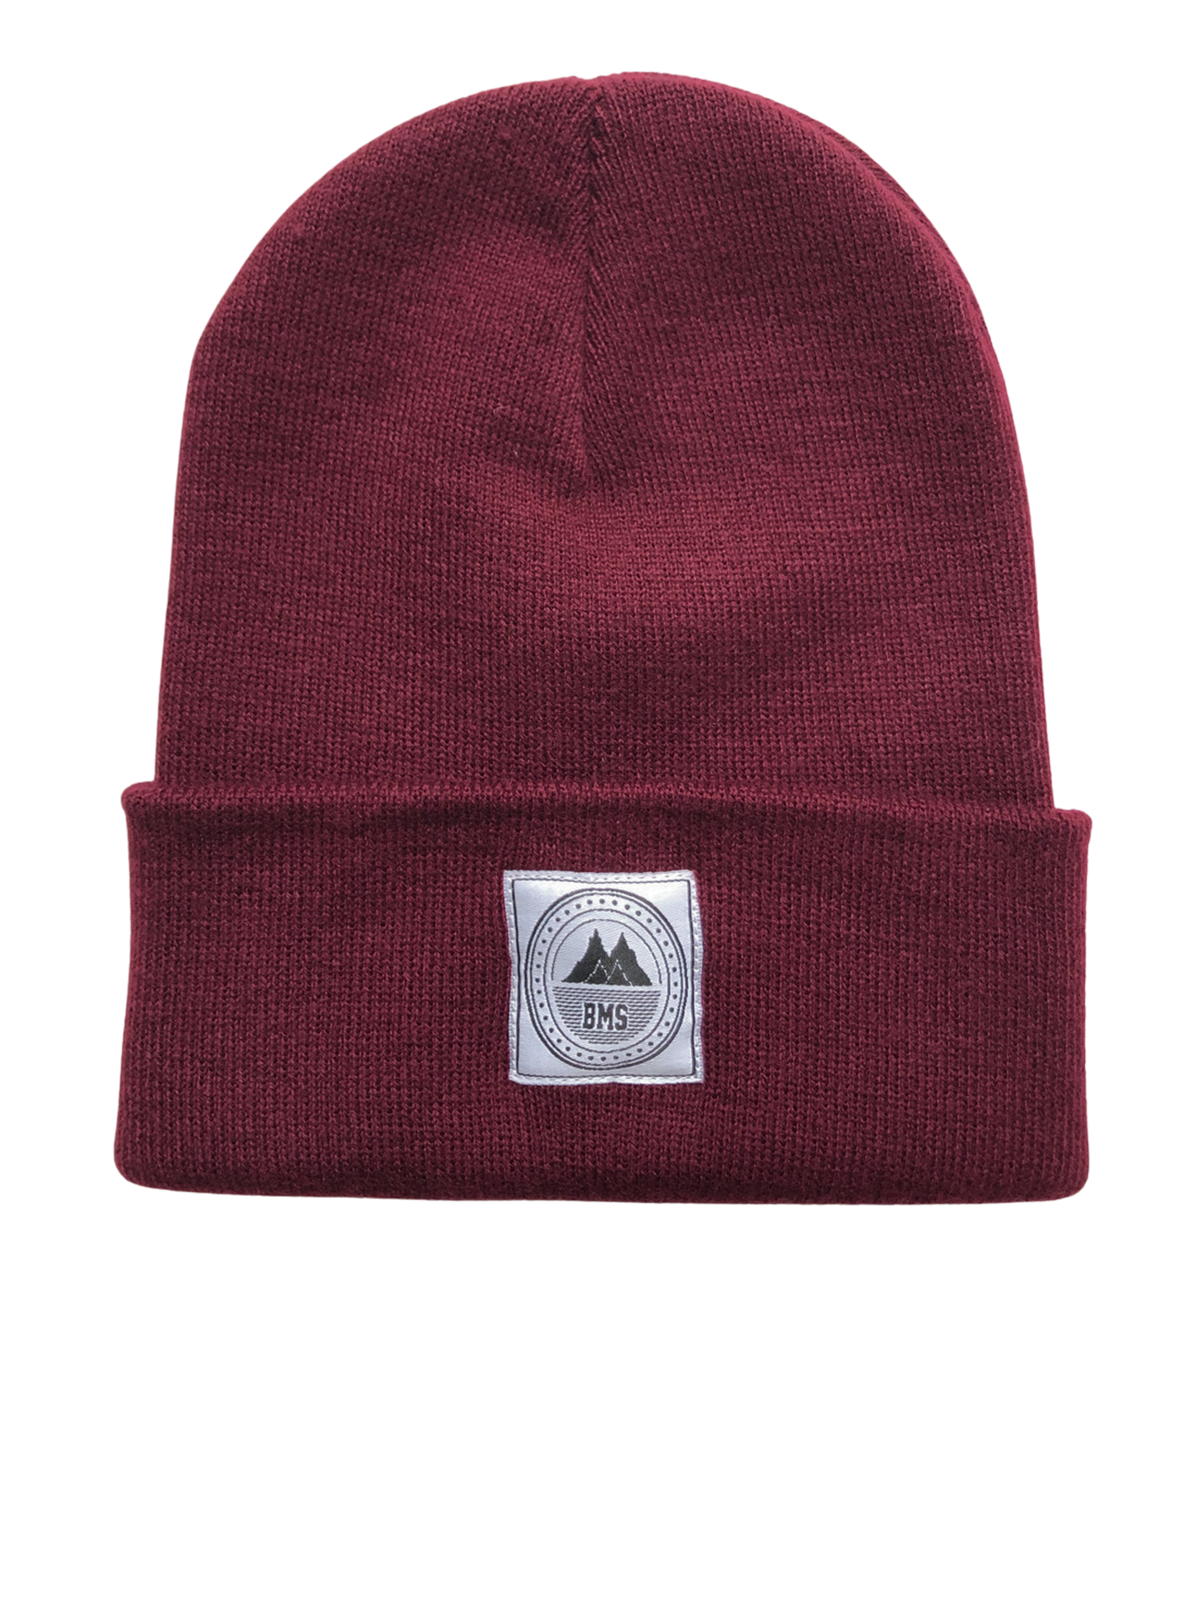 BMS Woven Patch Beanie (burgundy) - Blue Mountain Store